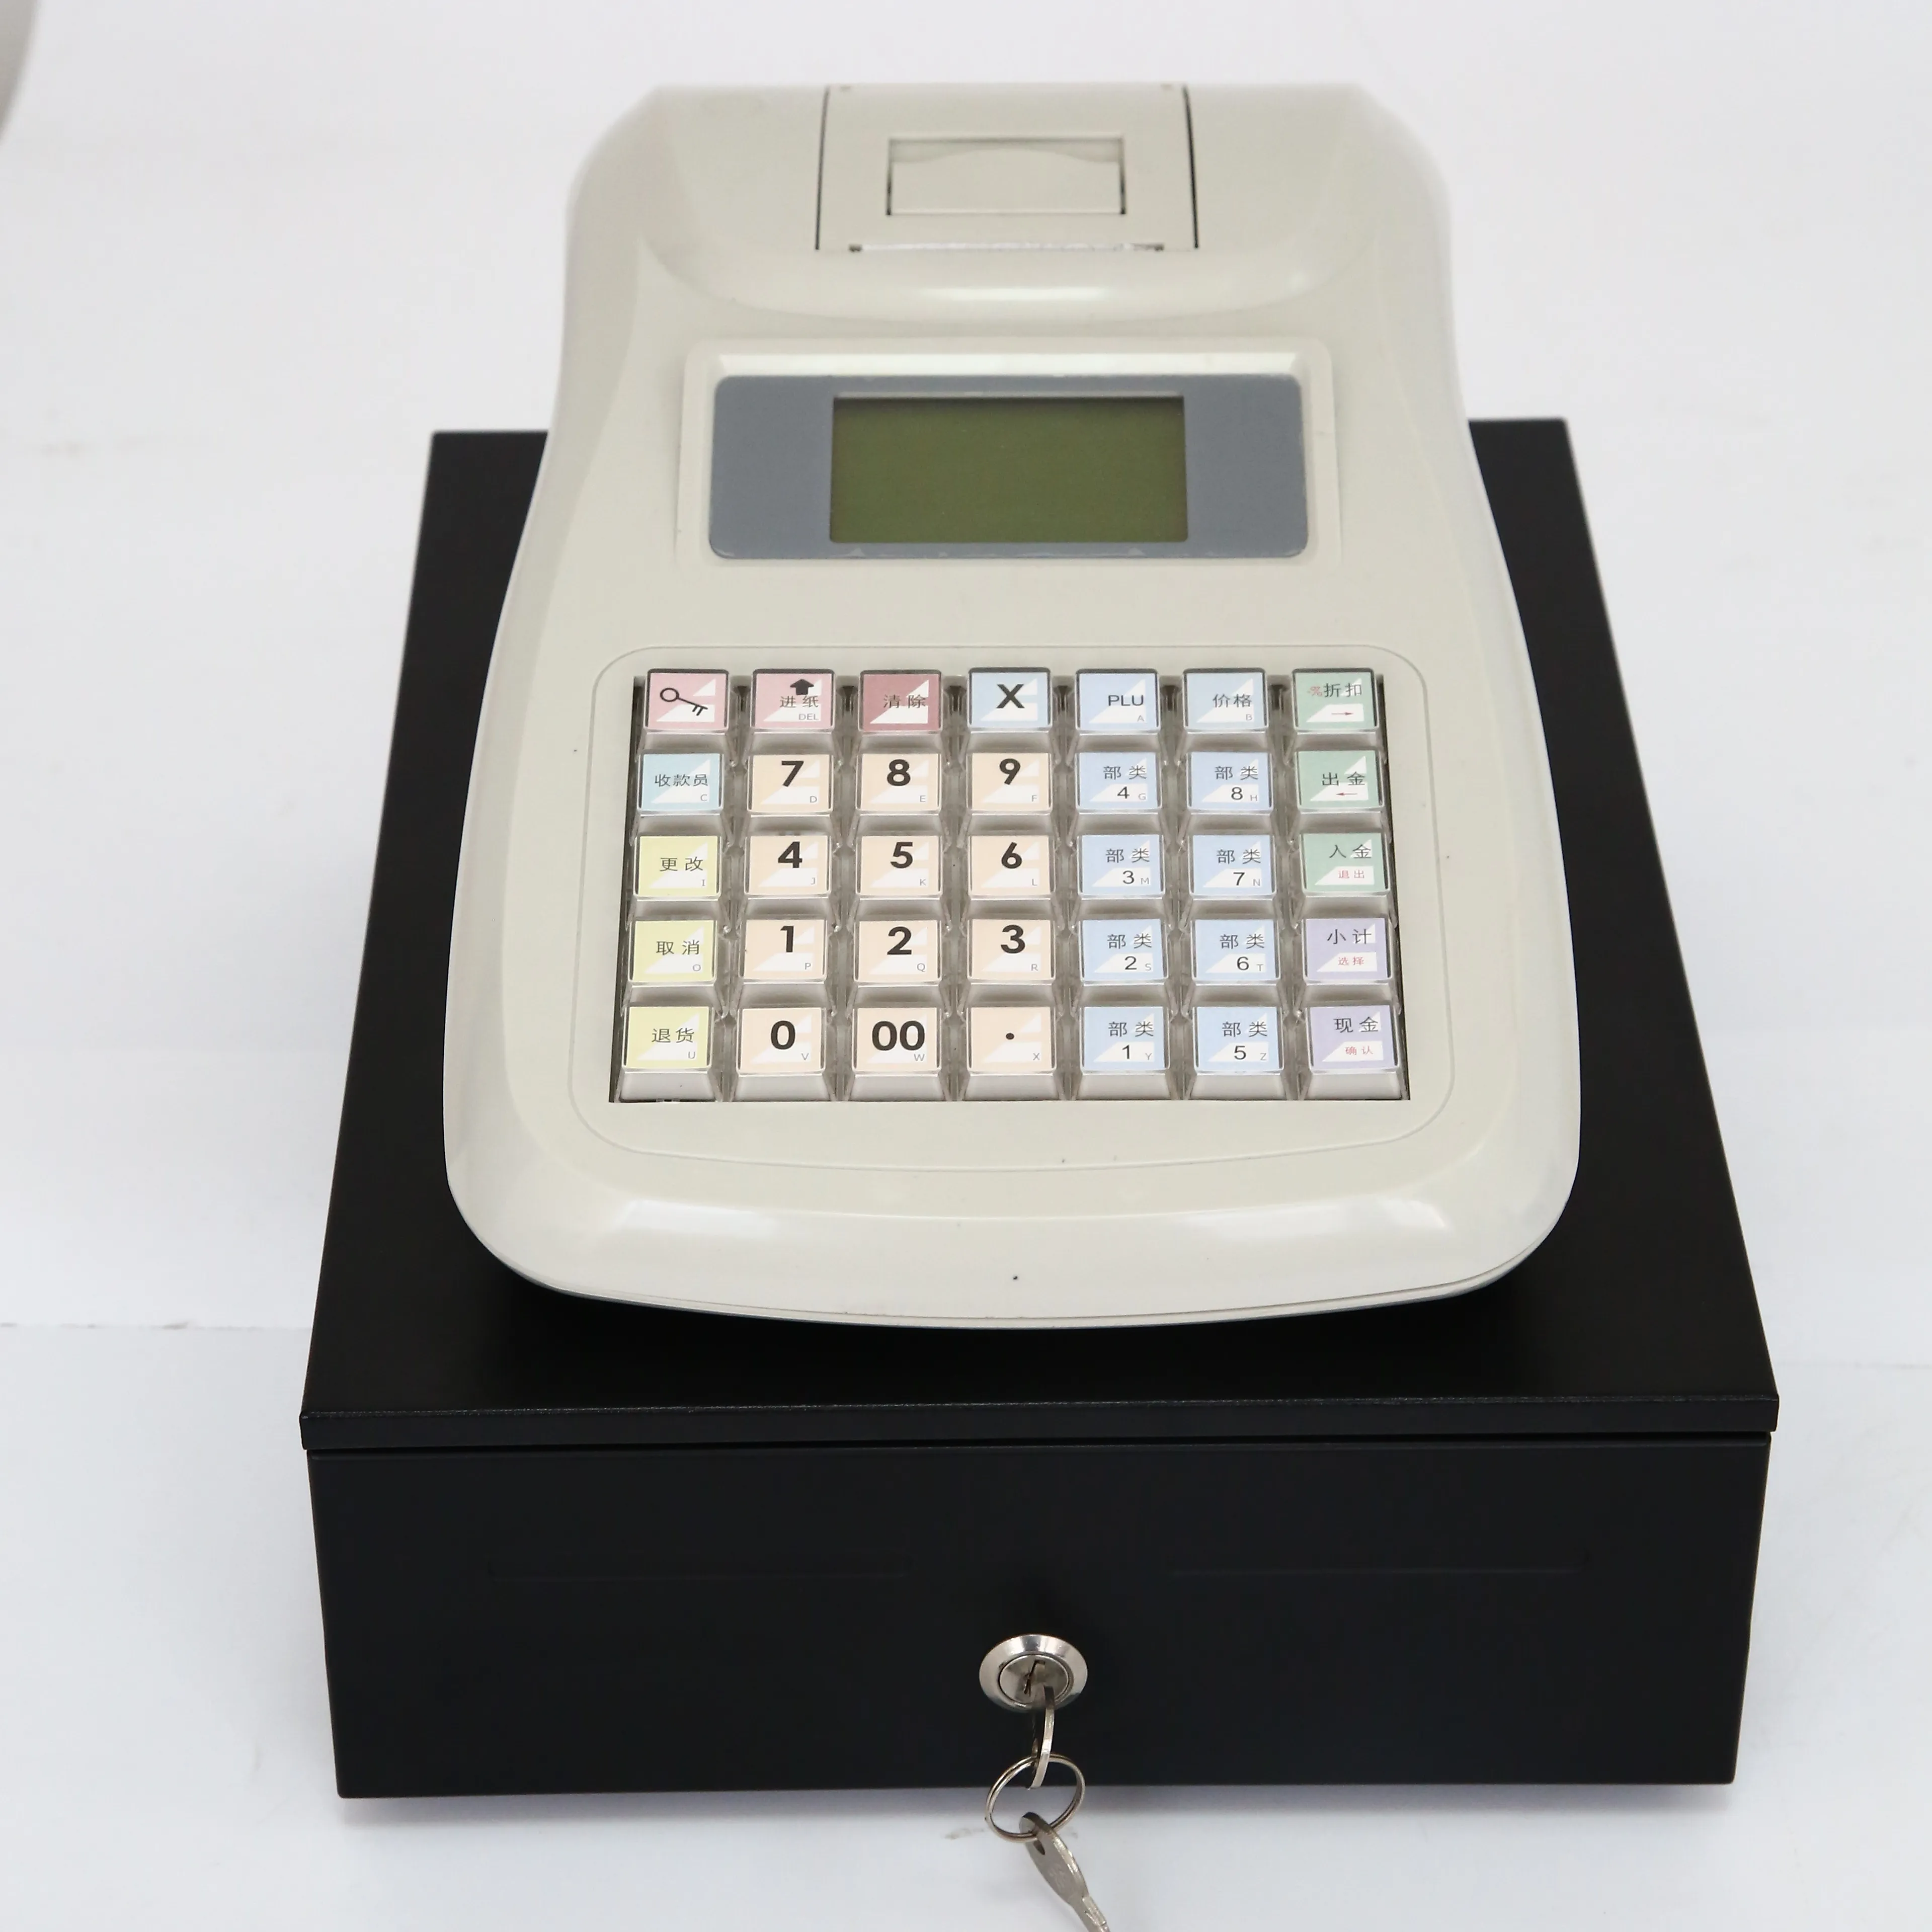 Standard English language Cash Register ECR-100 can do fiscal ecr with 5 tax rates